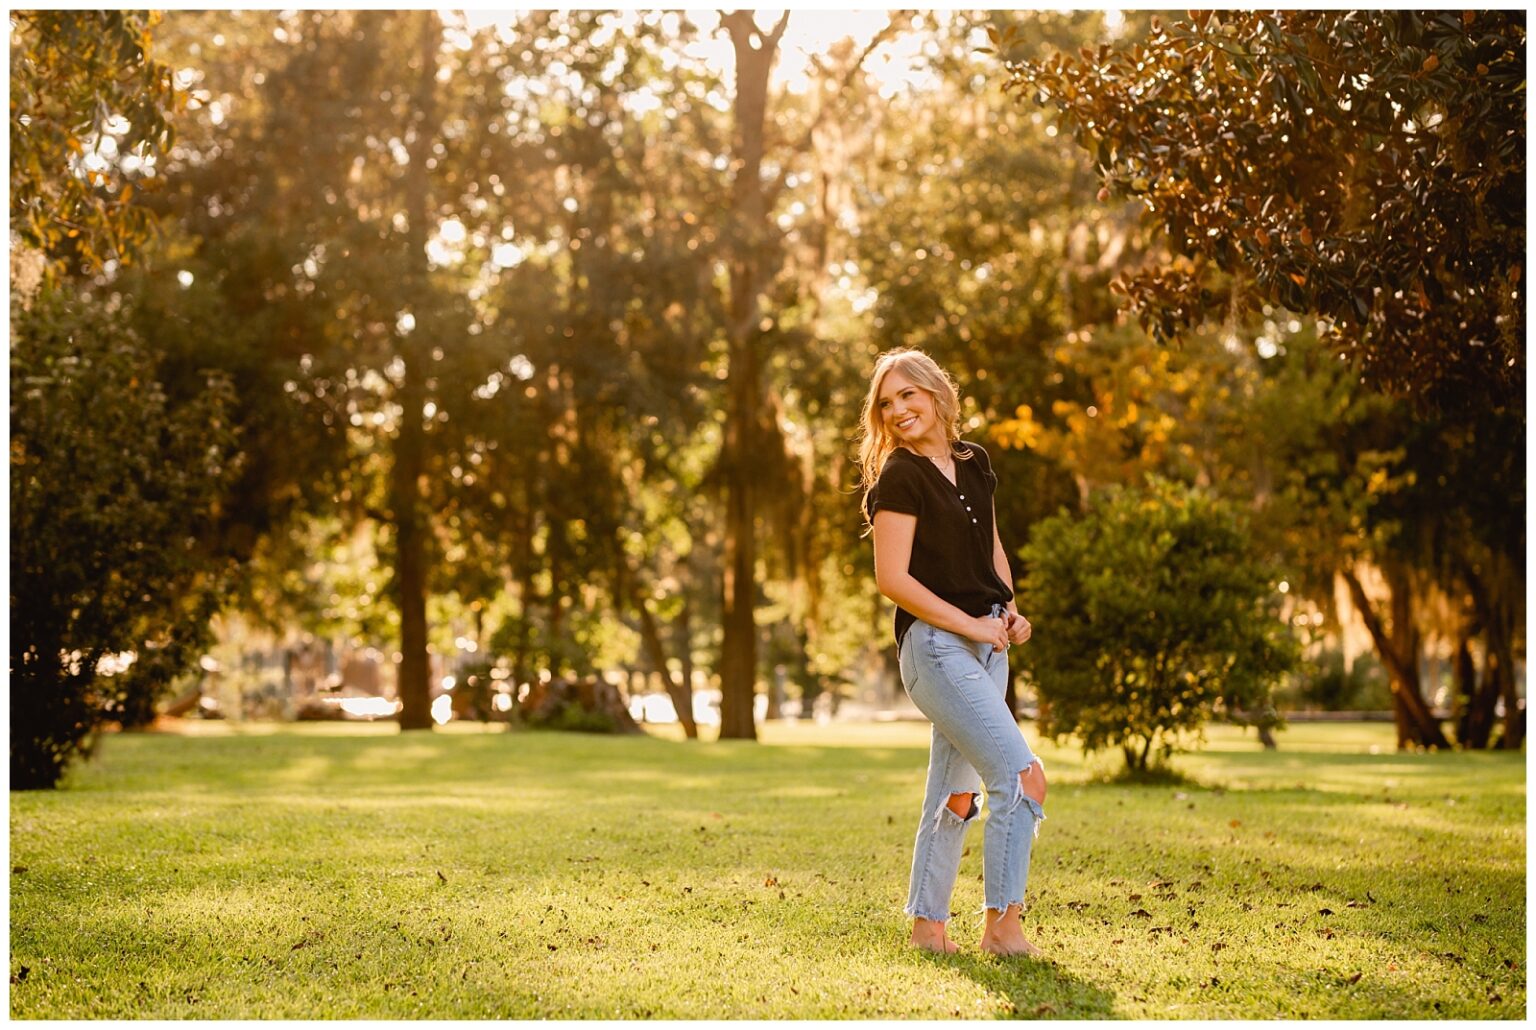 Senior Pictures in Thomasville, Georgia at the Rose Garden during sunset.